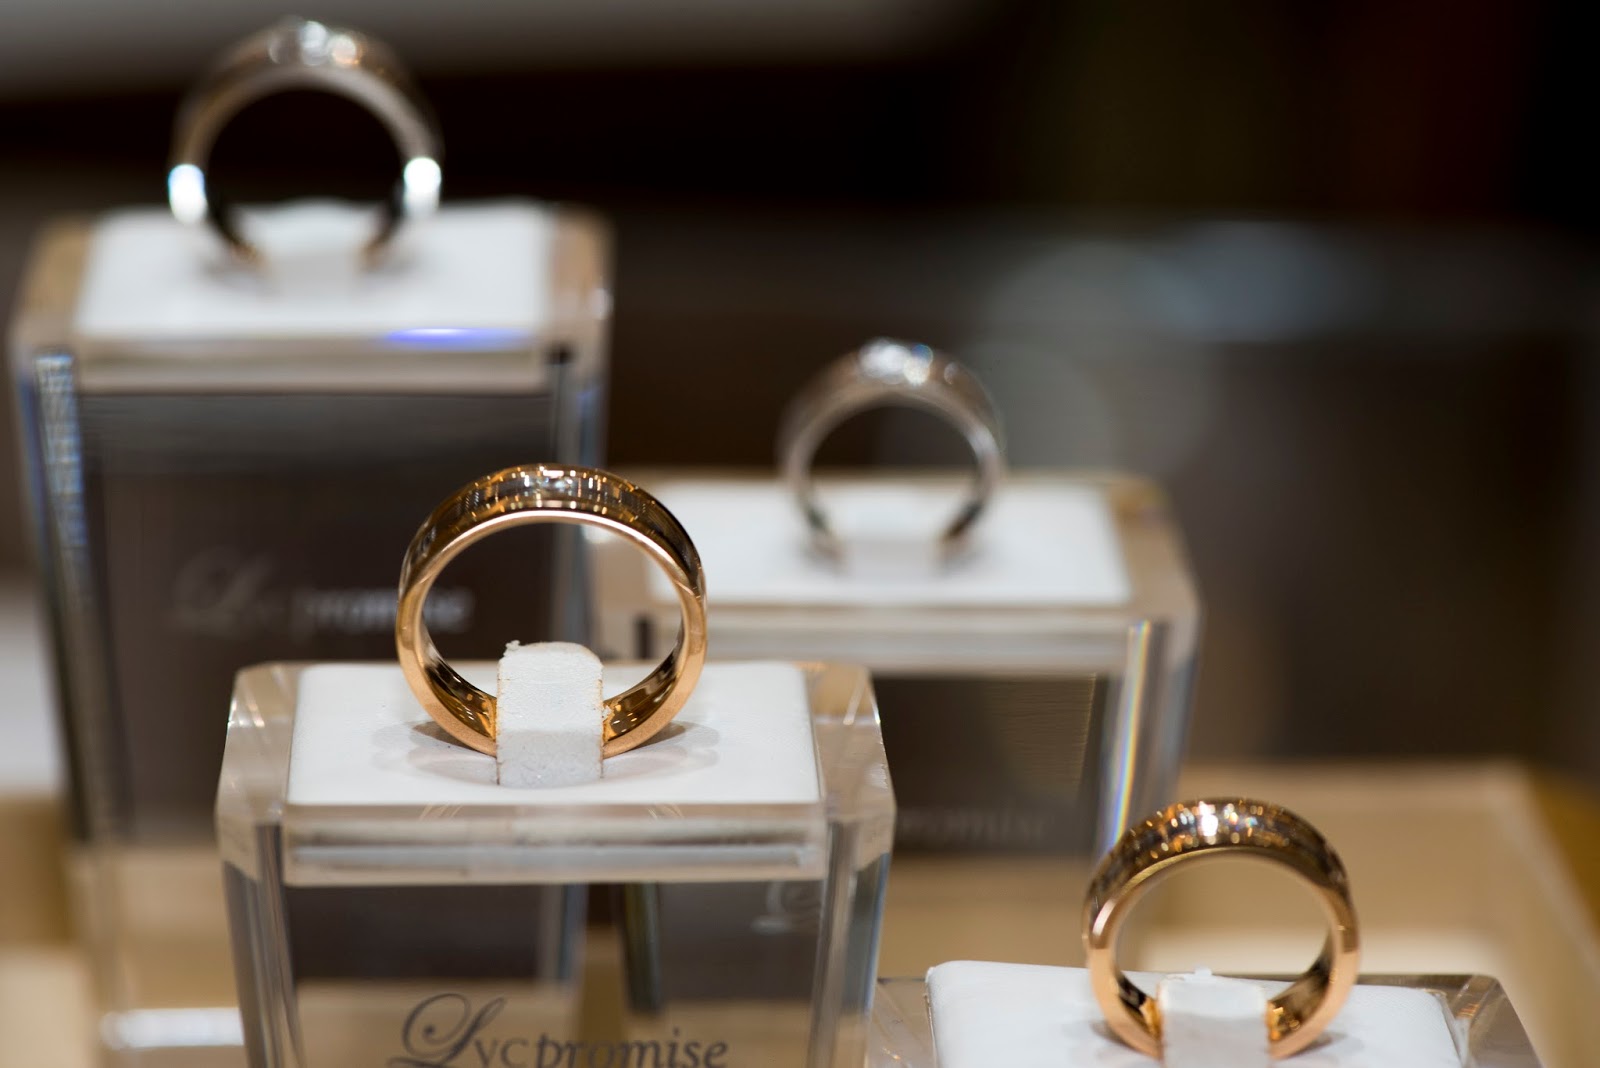 love and co wedding ring price